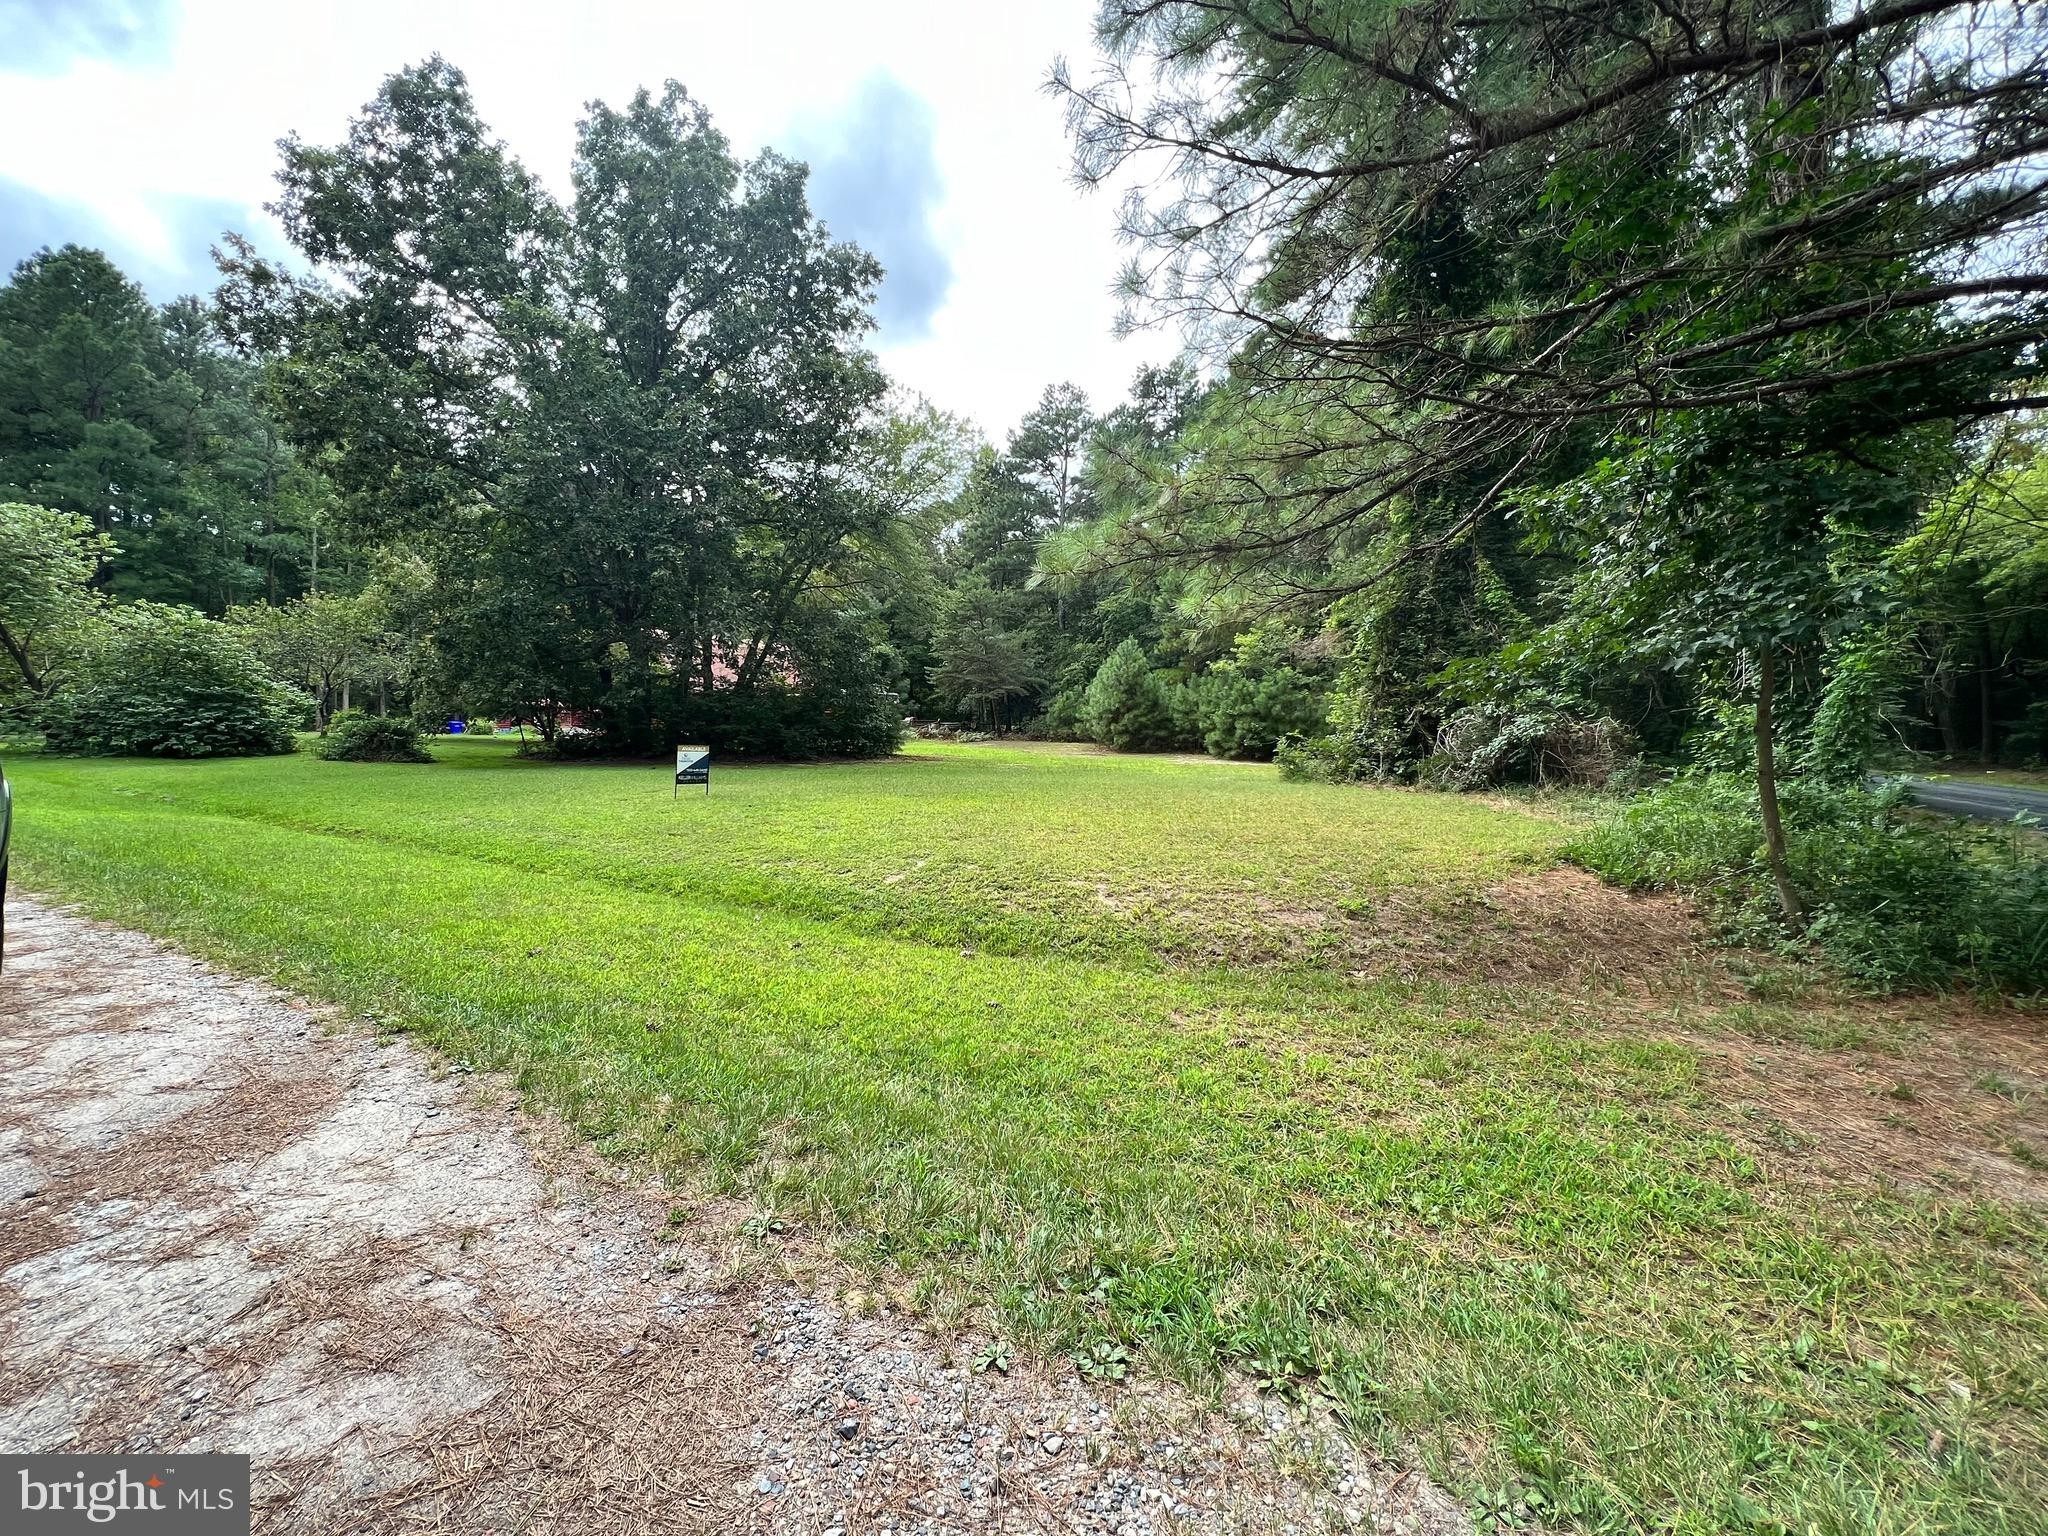 6. Lot 6 Lincoln Dr